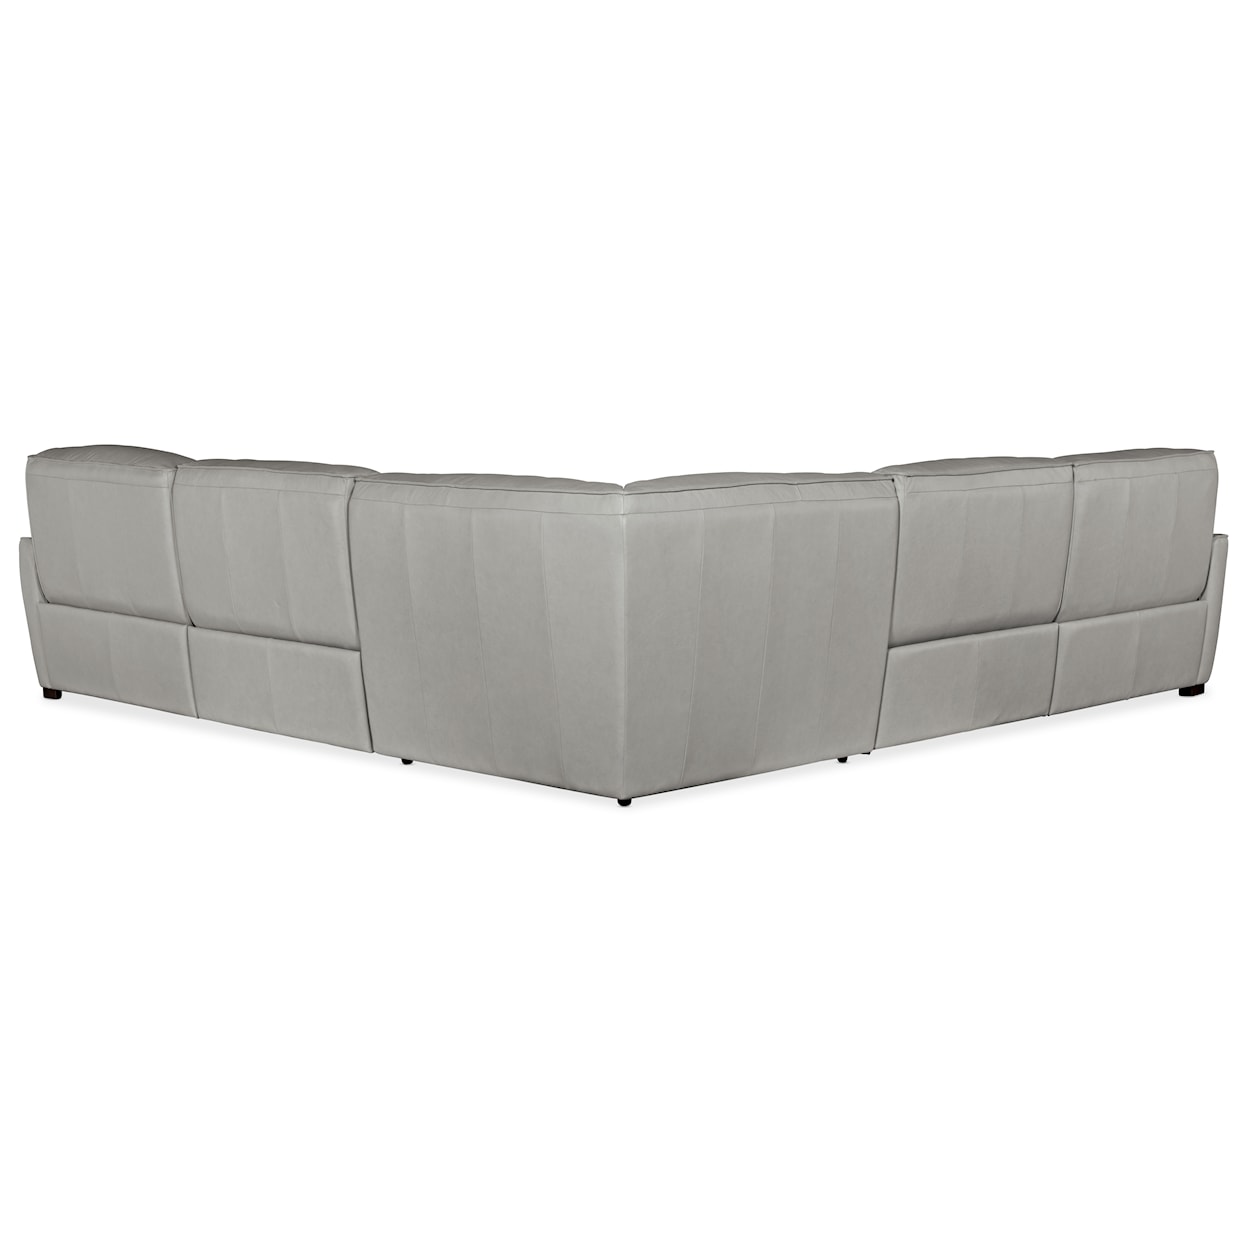 Hooker Furniture Reaux Leather Power Motion Sectional